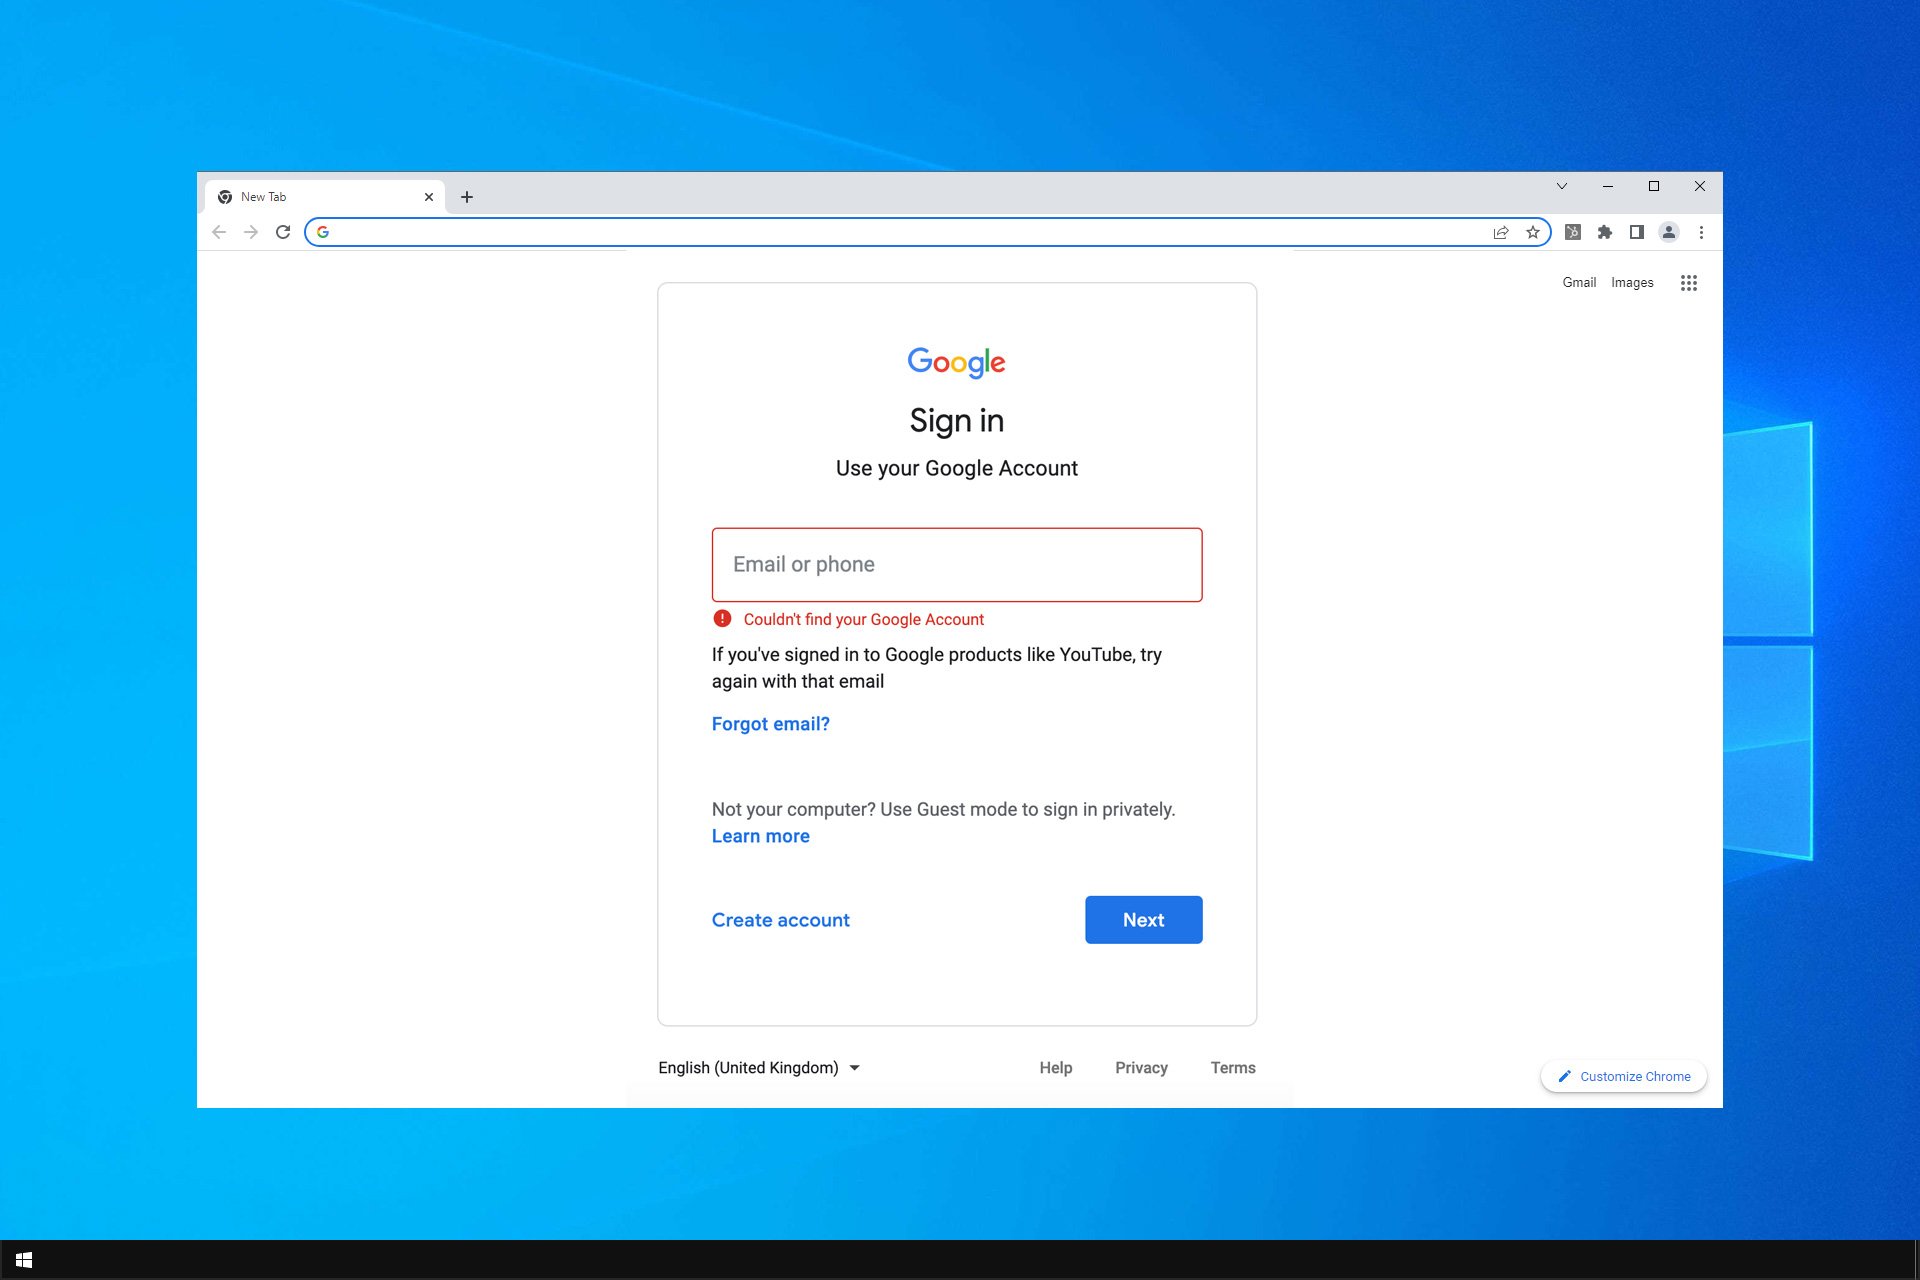 Google Account page gmail account could not sign in/ gmail could not login/ gmail could not parse the login request